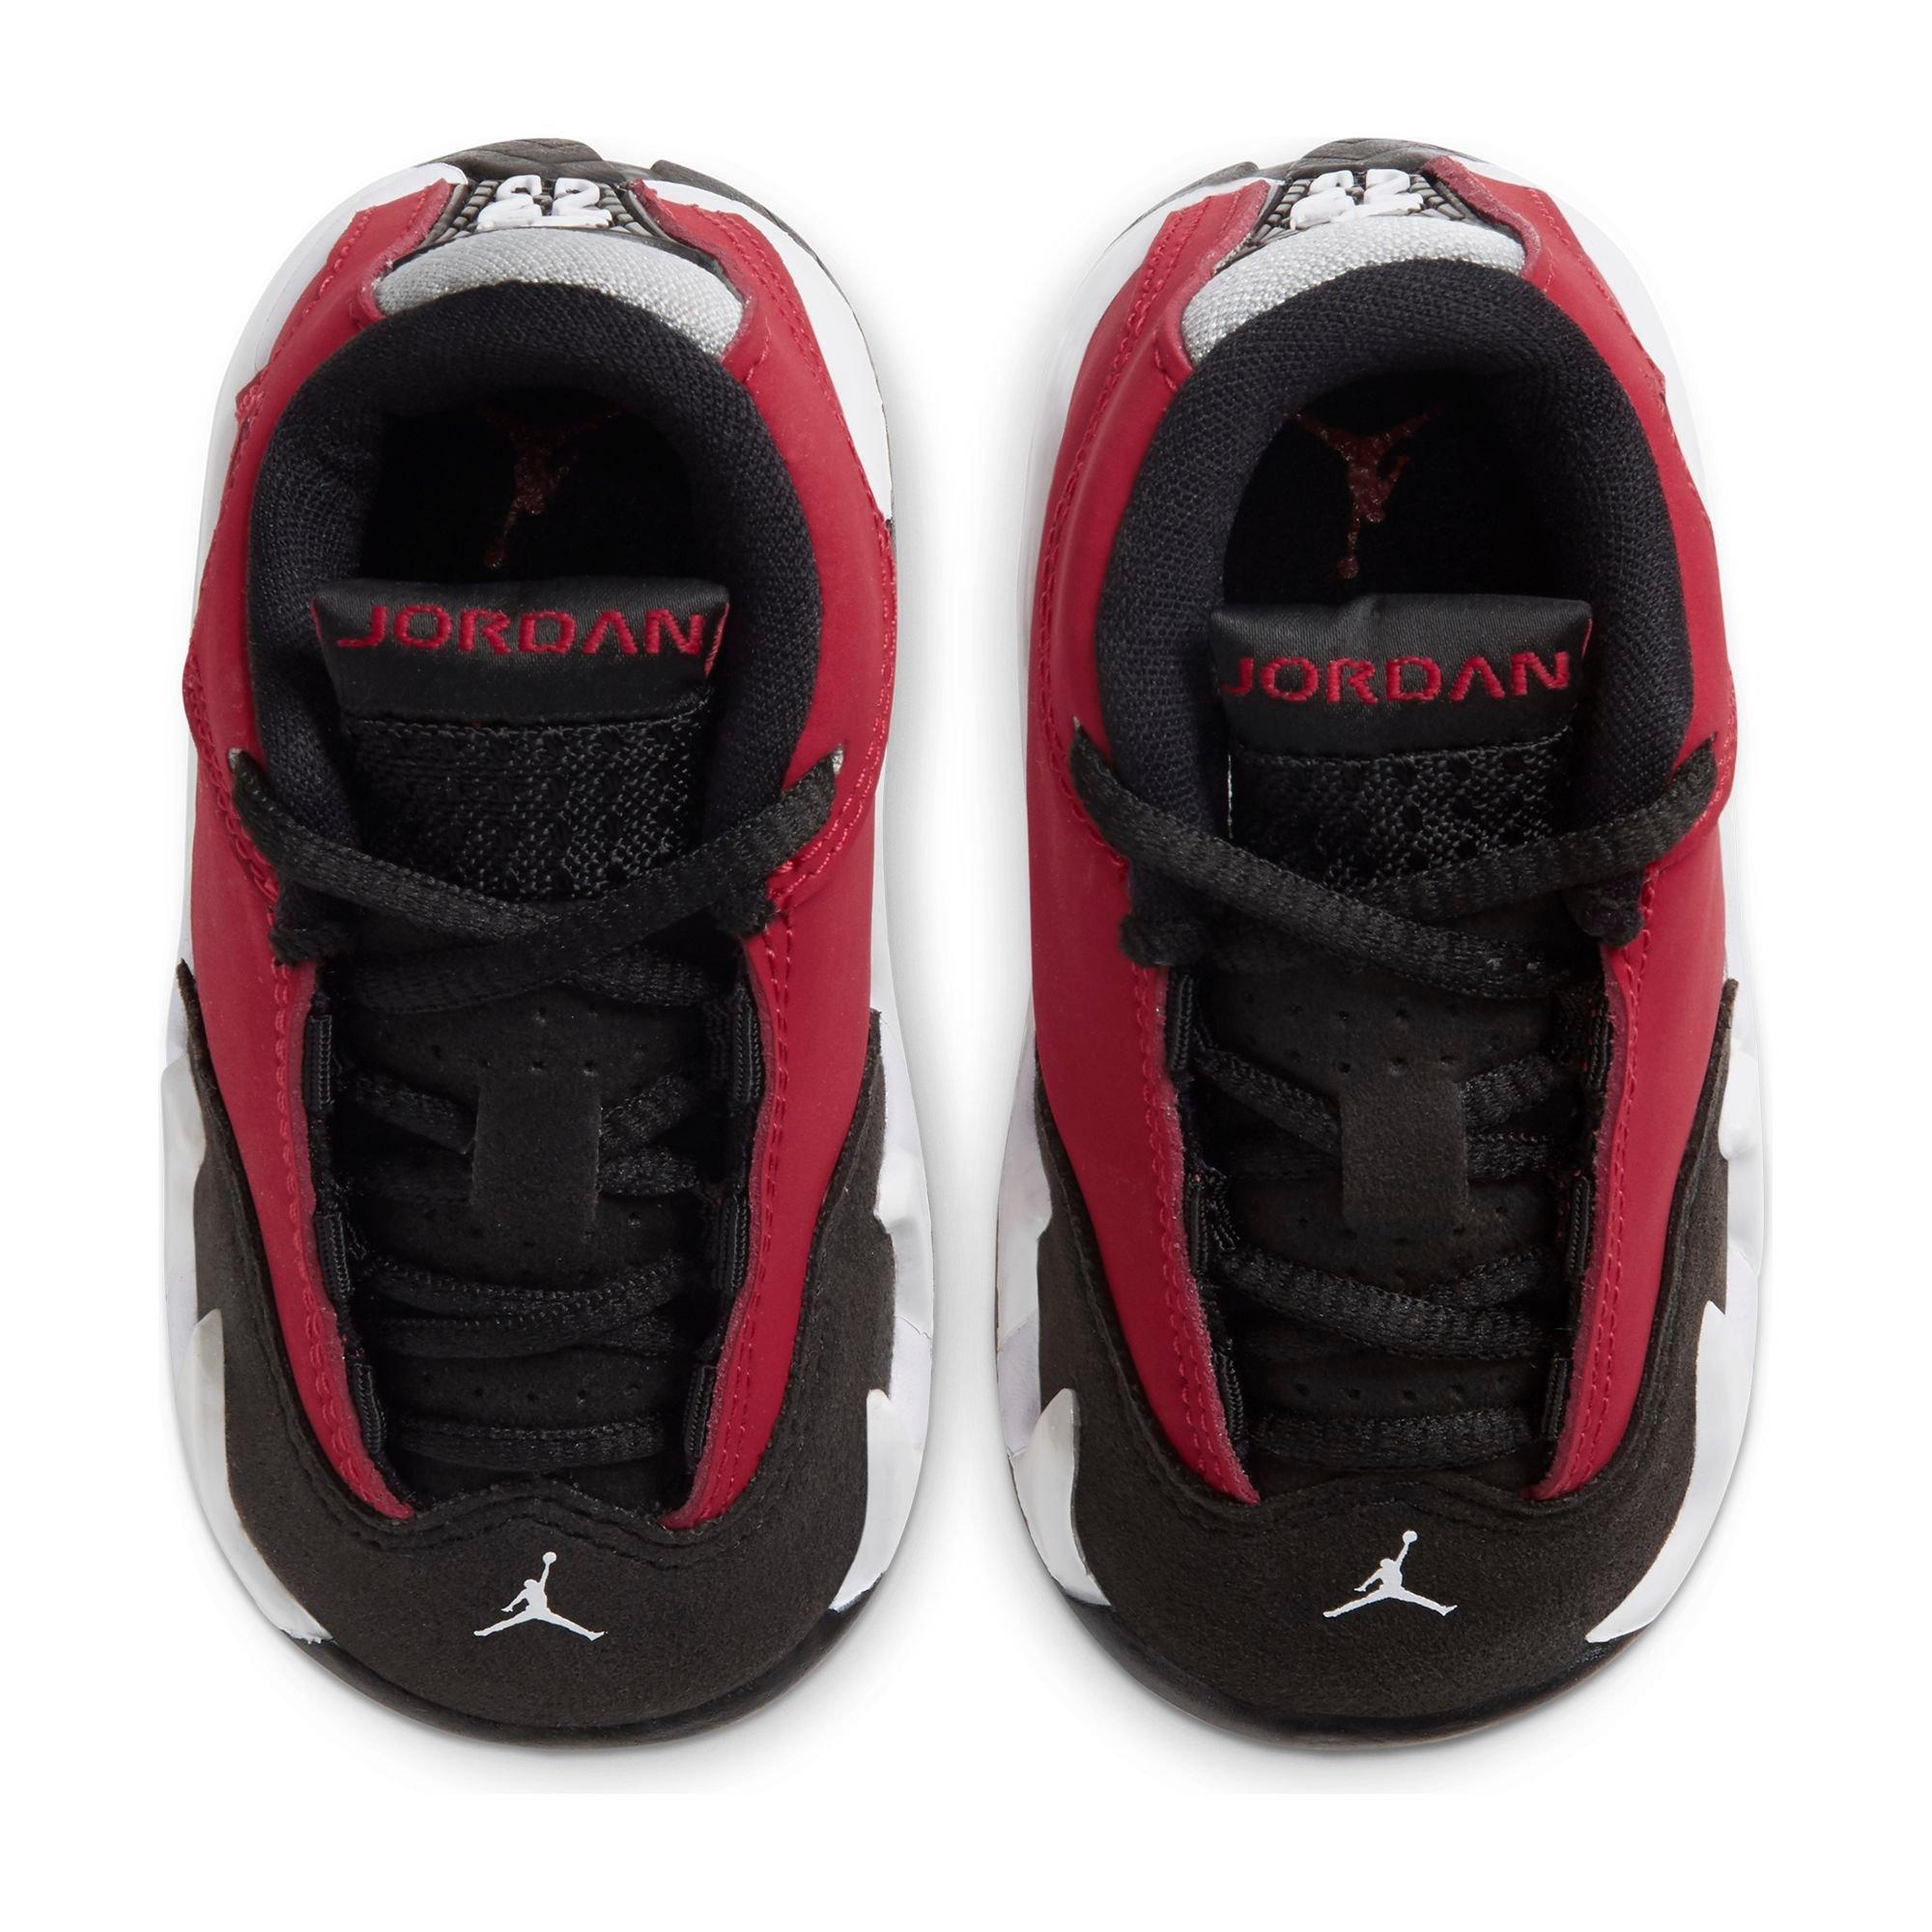 gym red 14s toddlers